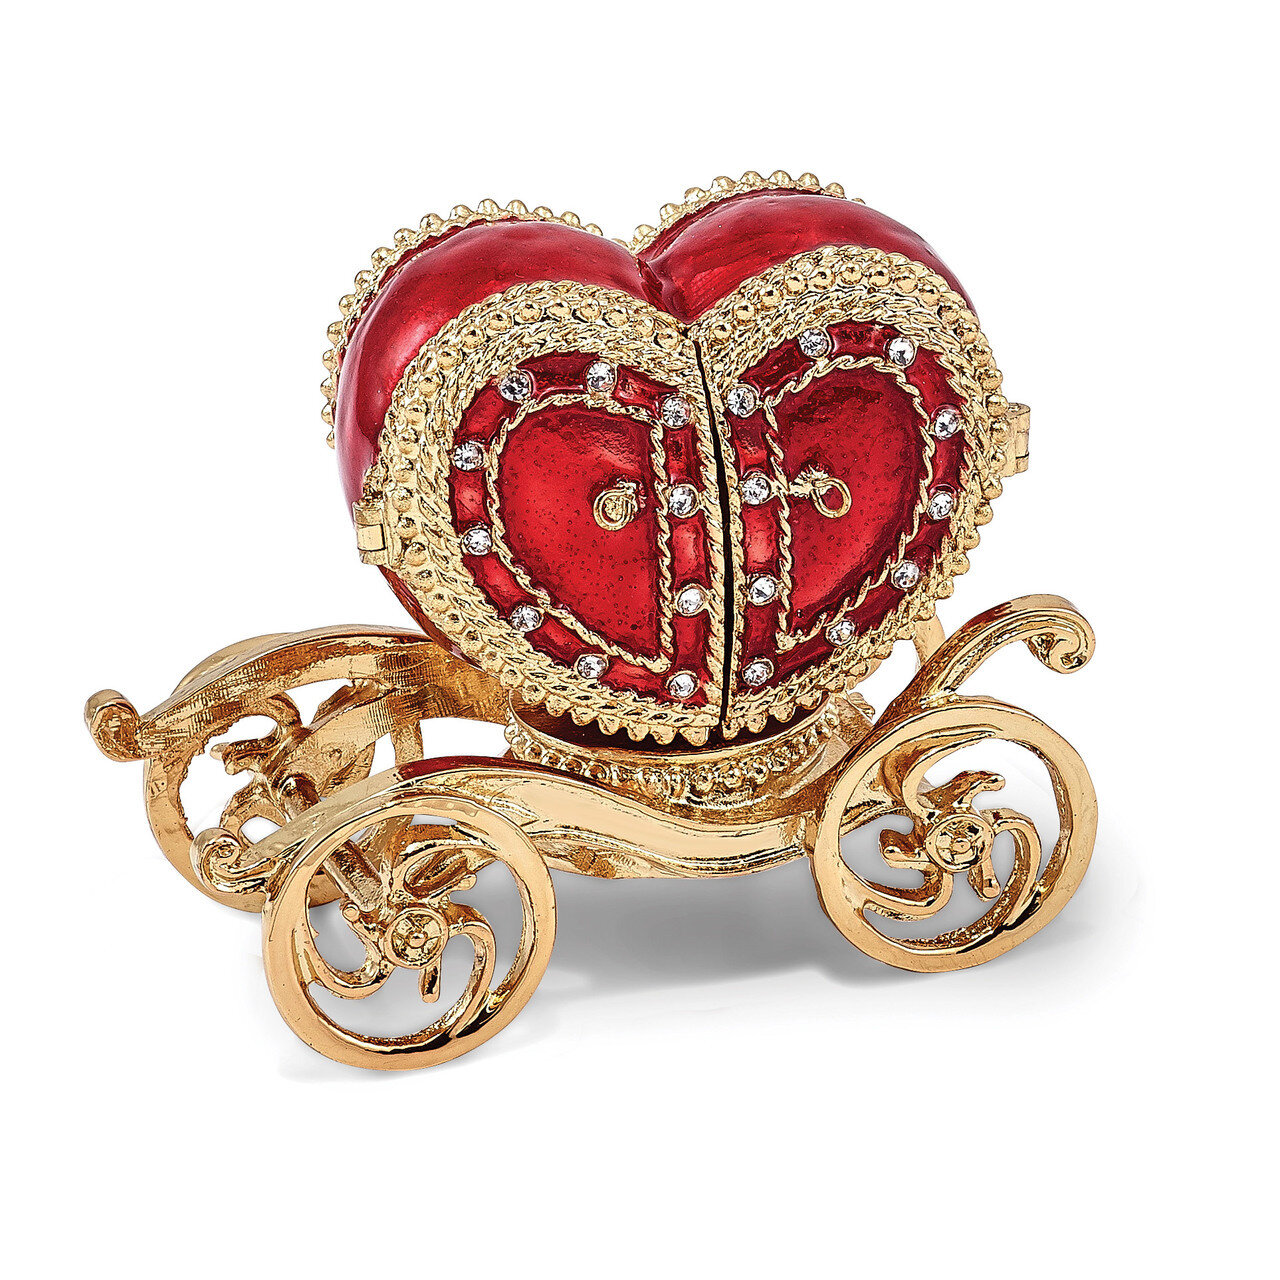 Heart Carriage Ring Holder Trinket Box Enamel on Pewter by Jere